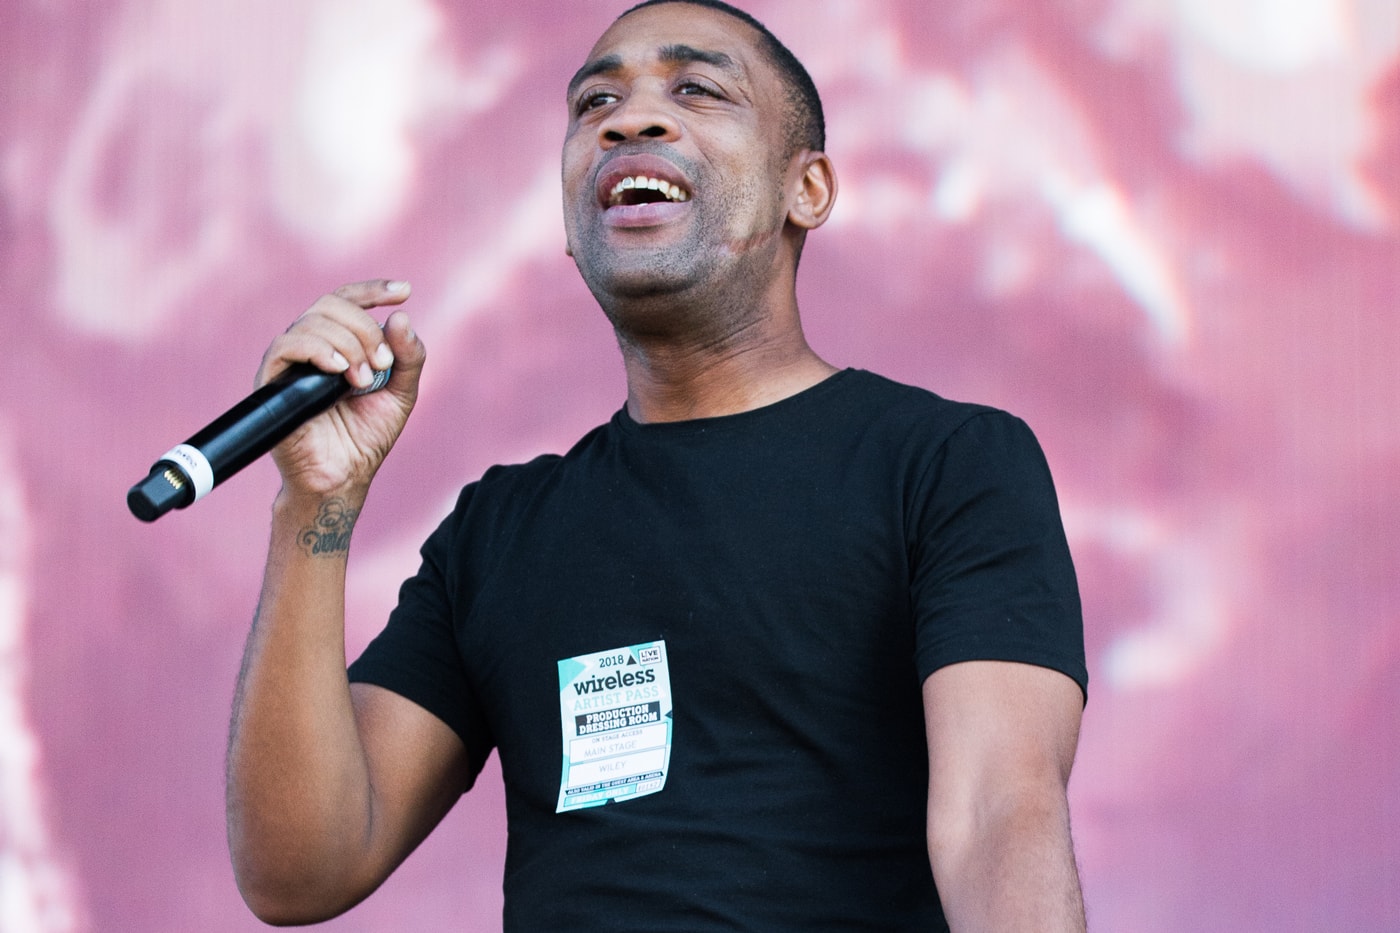 Wiley Calls Out Drake & OVO records For "Sh*t Record Deals" Nicki Minaj Popcaan criticize tweets twitter beef culture vulture ed sheeran pagan godfather of grime 